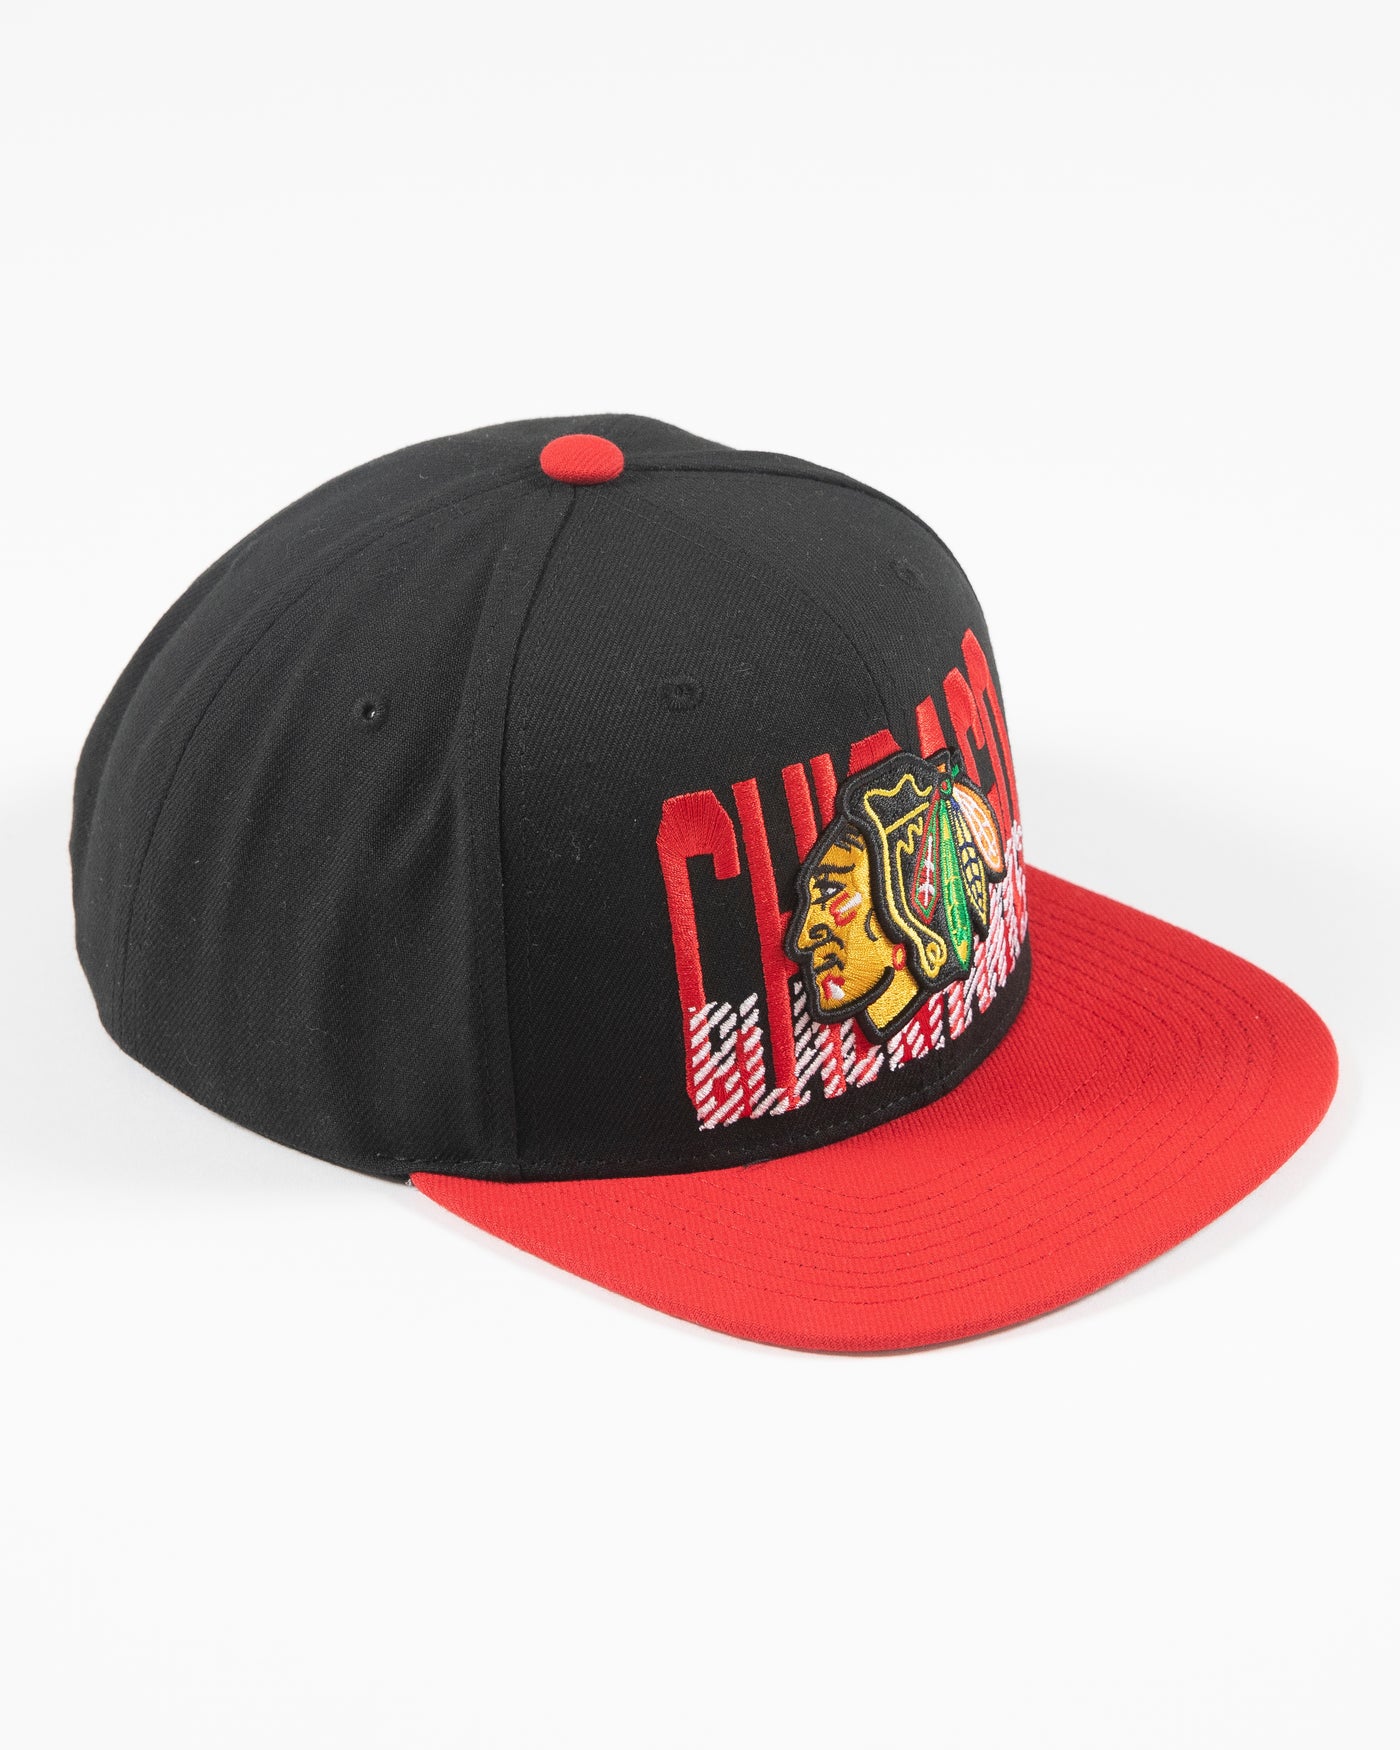 Mitchell & Ness Chicago Blackhawks snapback with red brim and primary logo with cross check wordmark embroidered on front panel - right angle lay flat